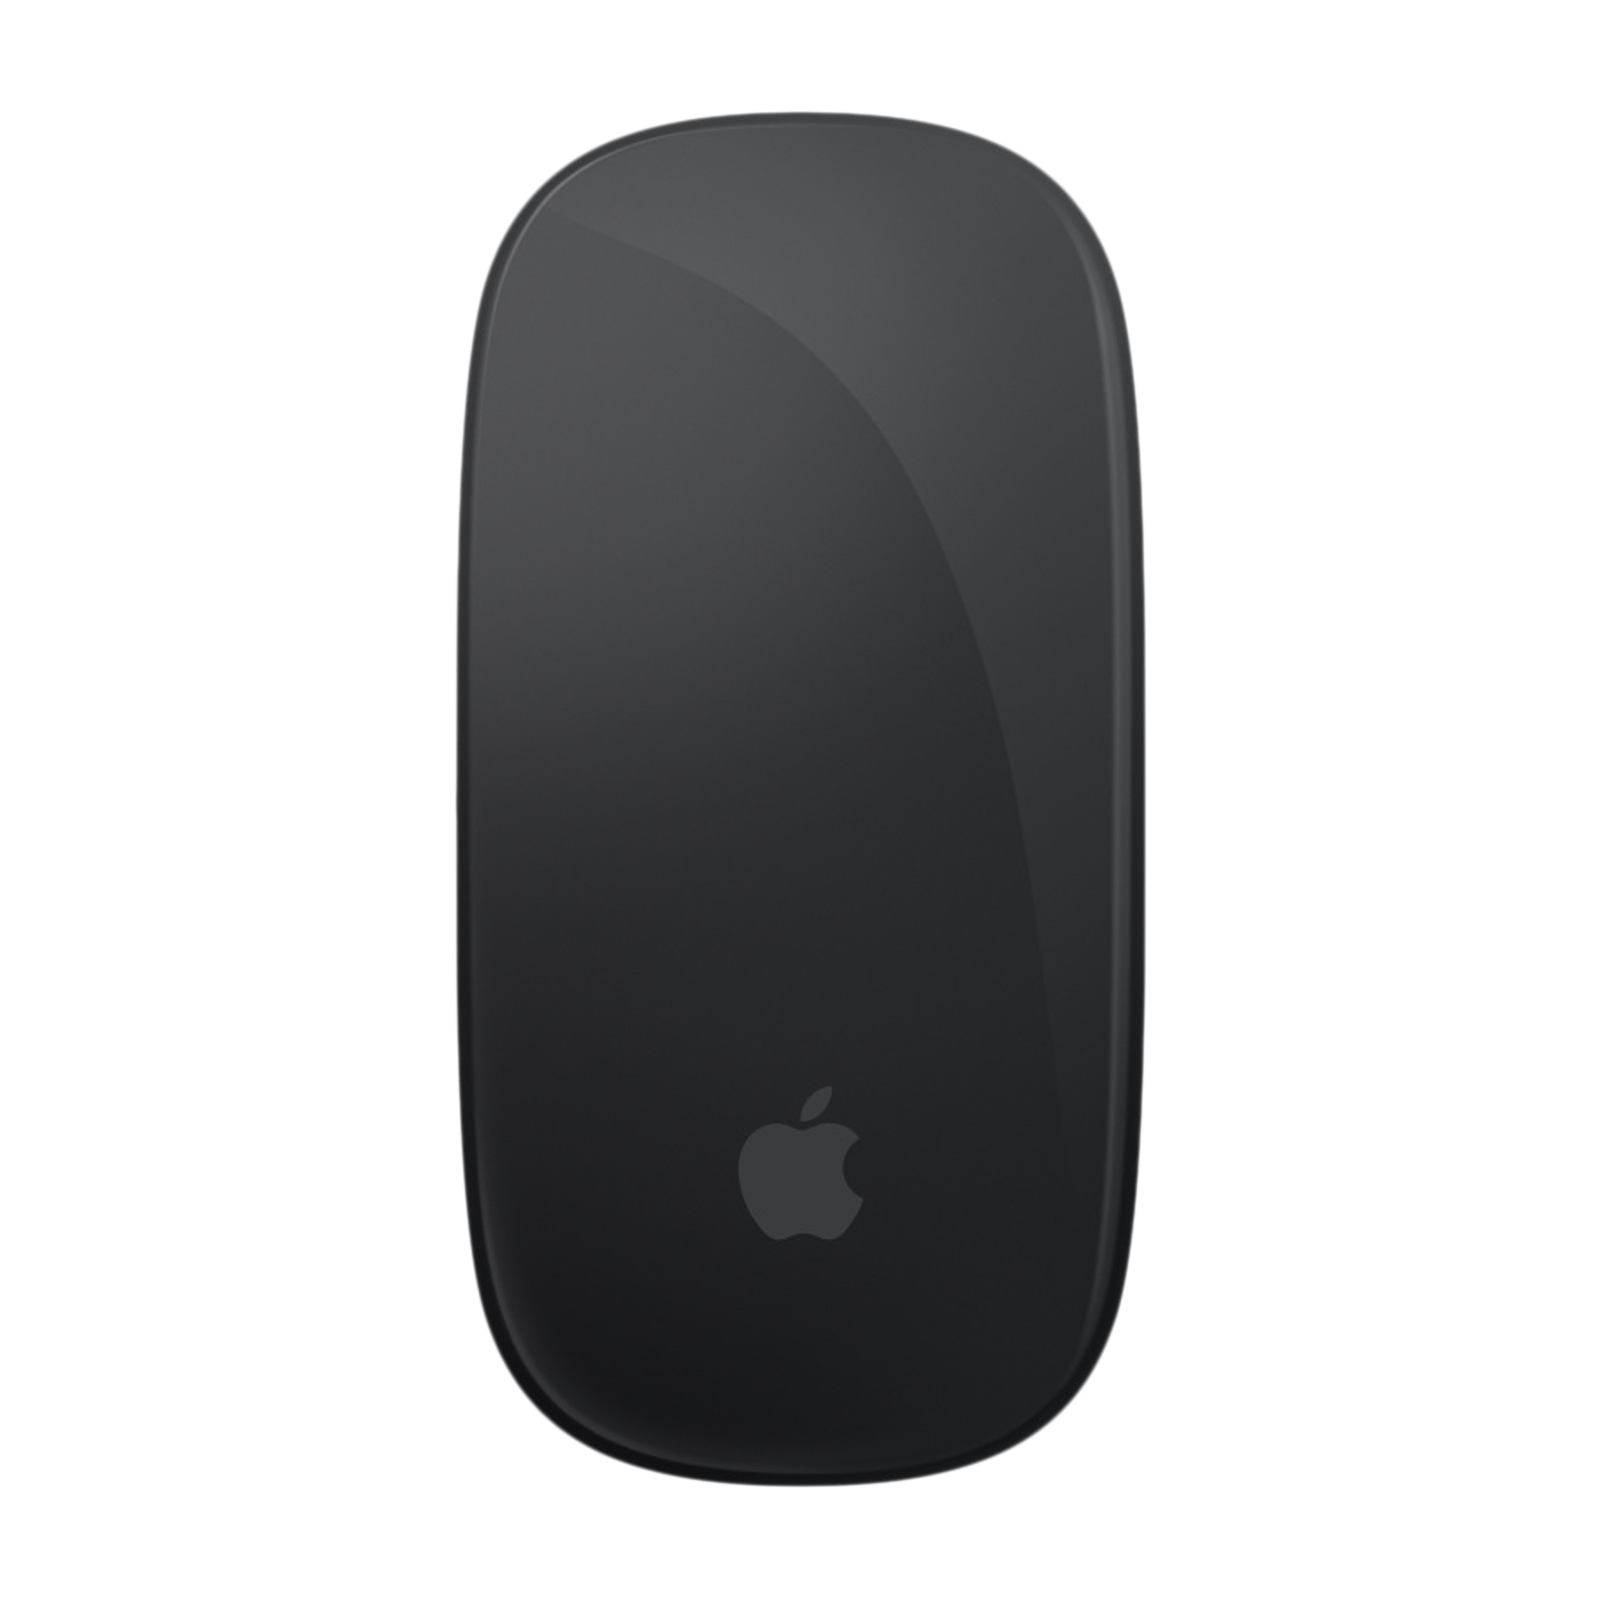 Apple Magic Rechargeable Wireless Optical Mouse (, Optimised Foot Design, Black)